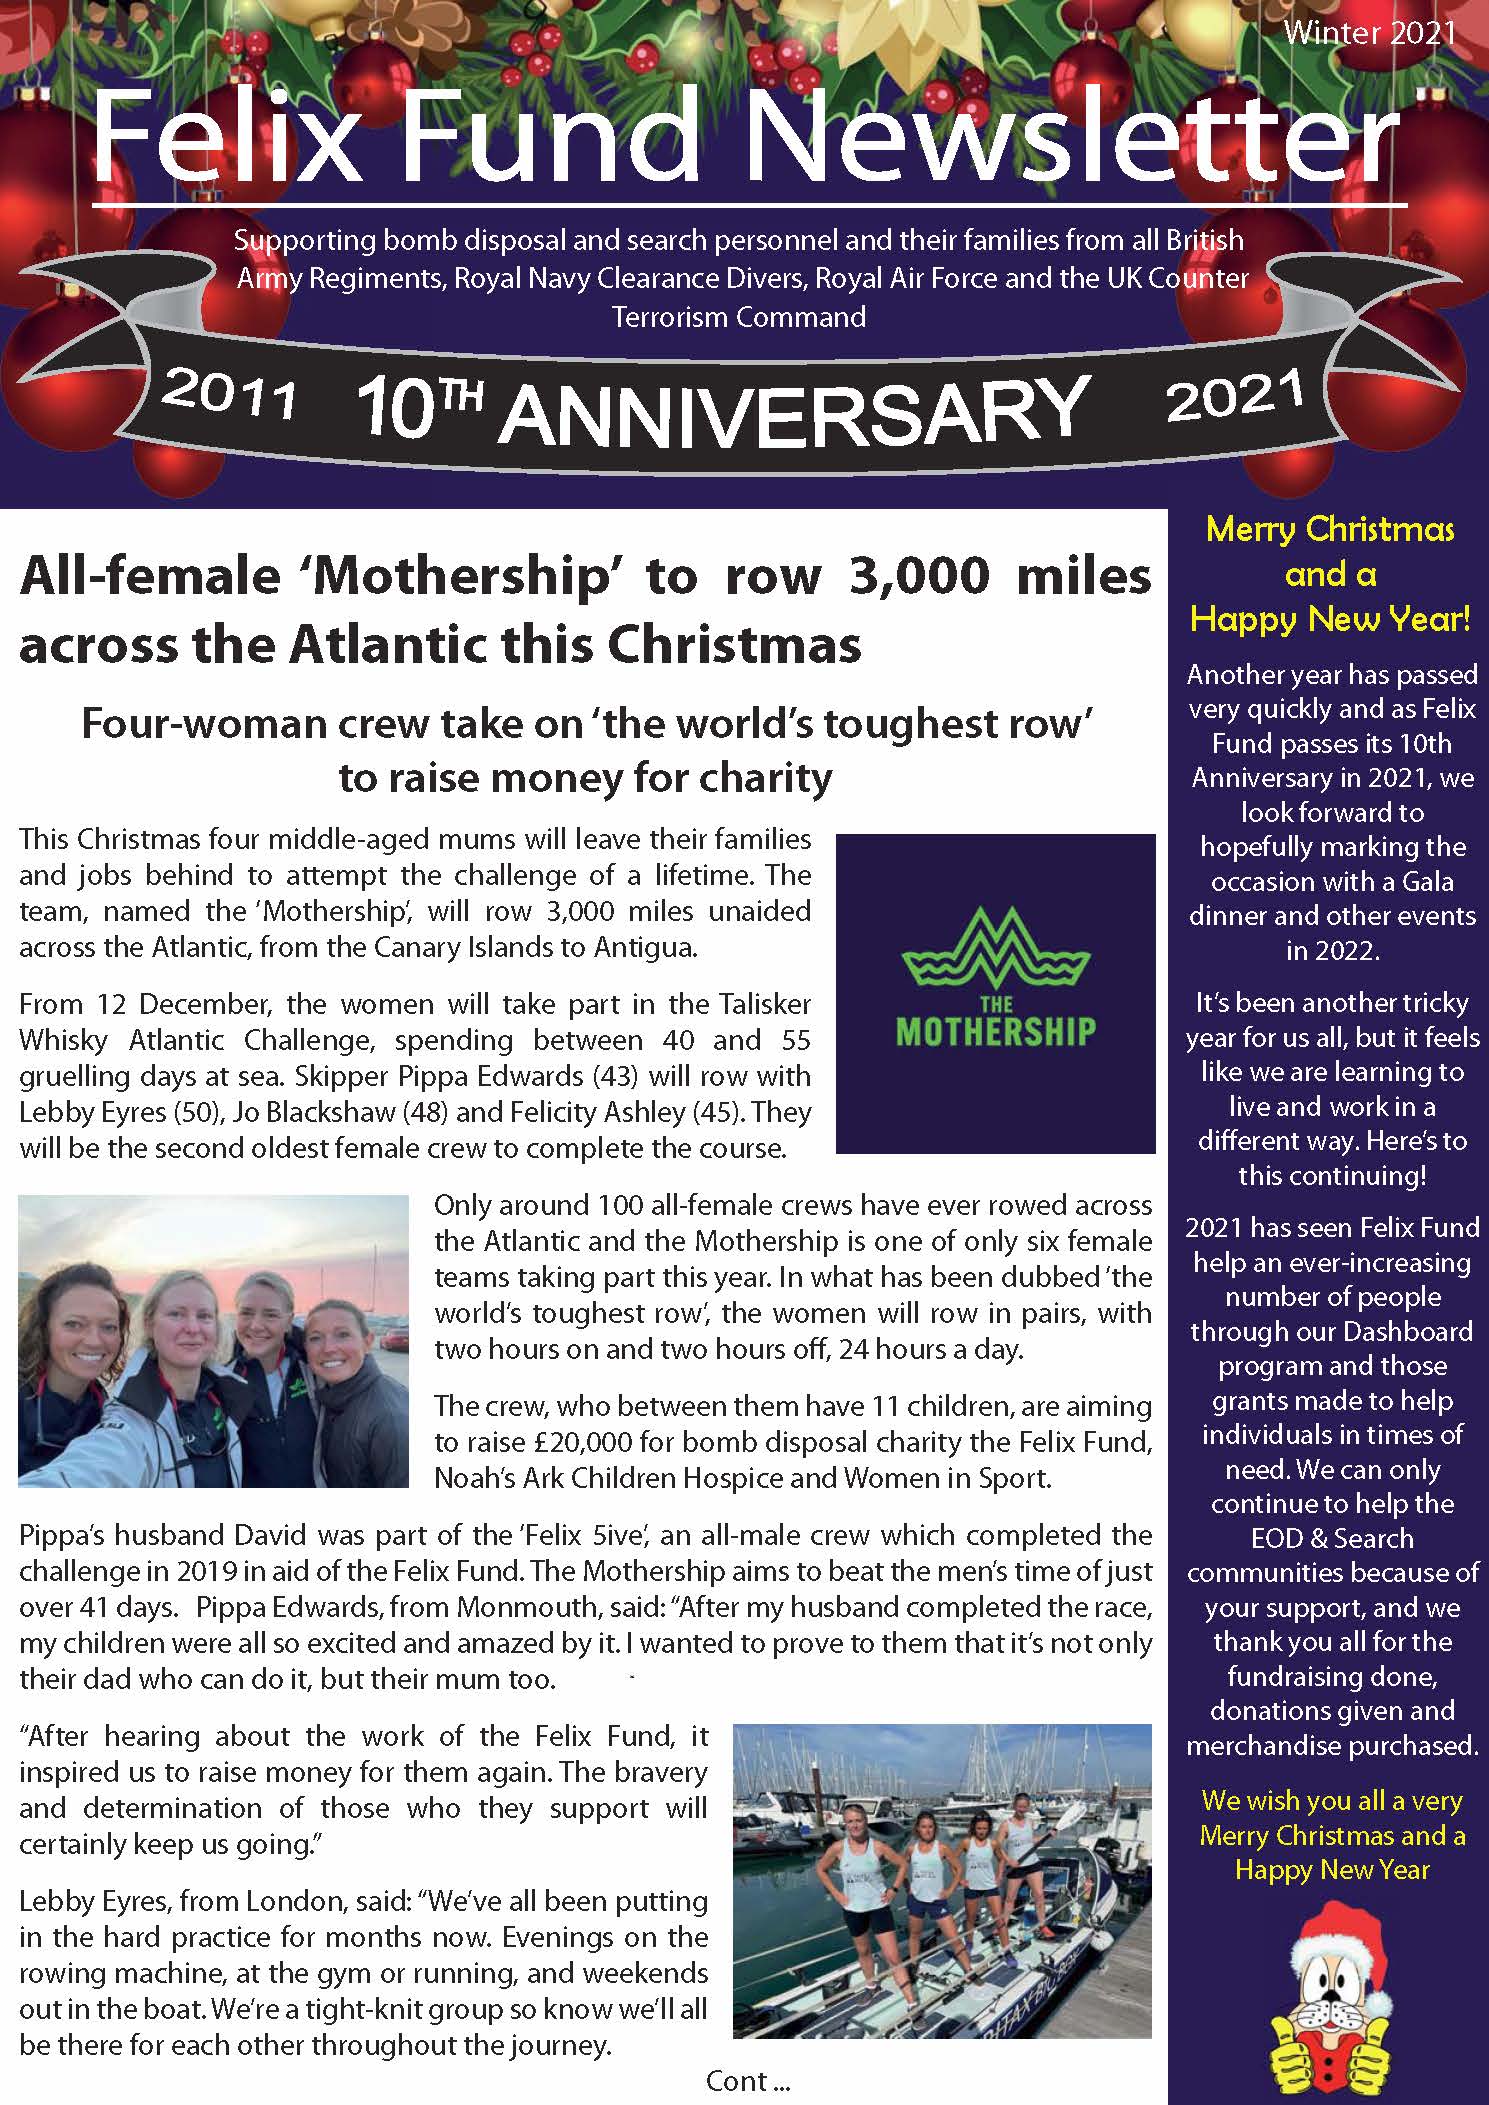 Winter 2021 newsletter front page